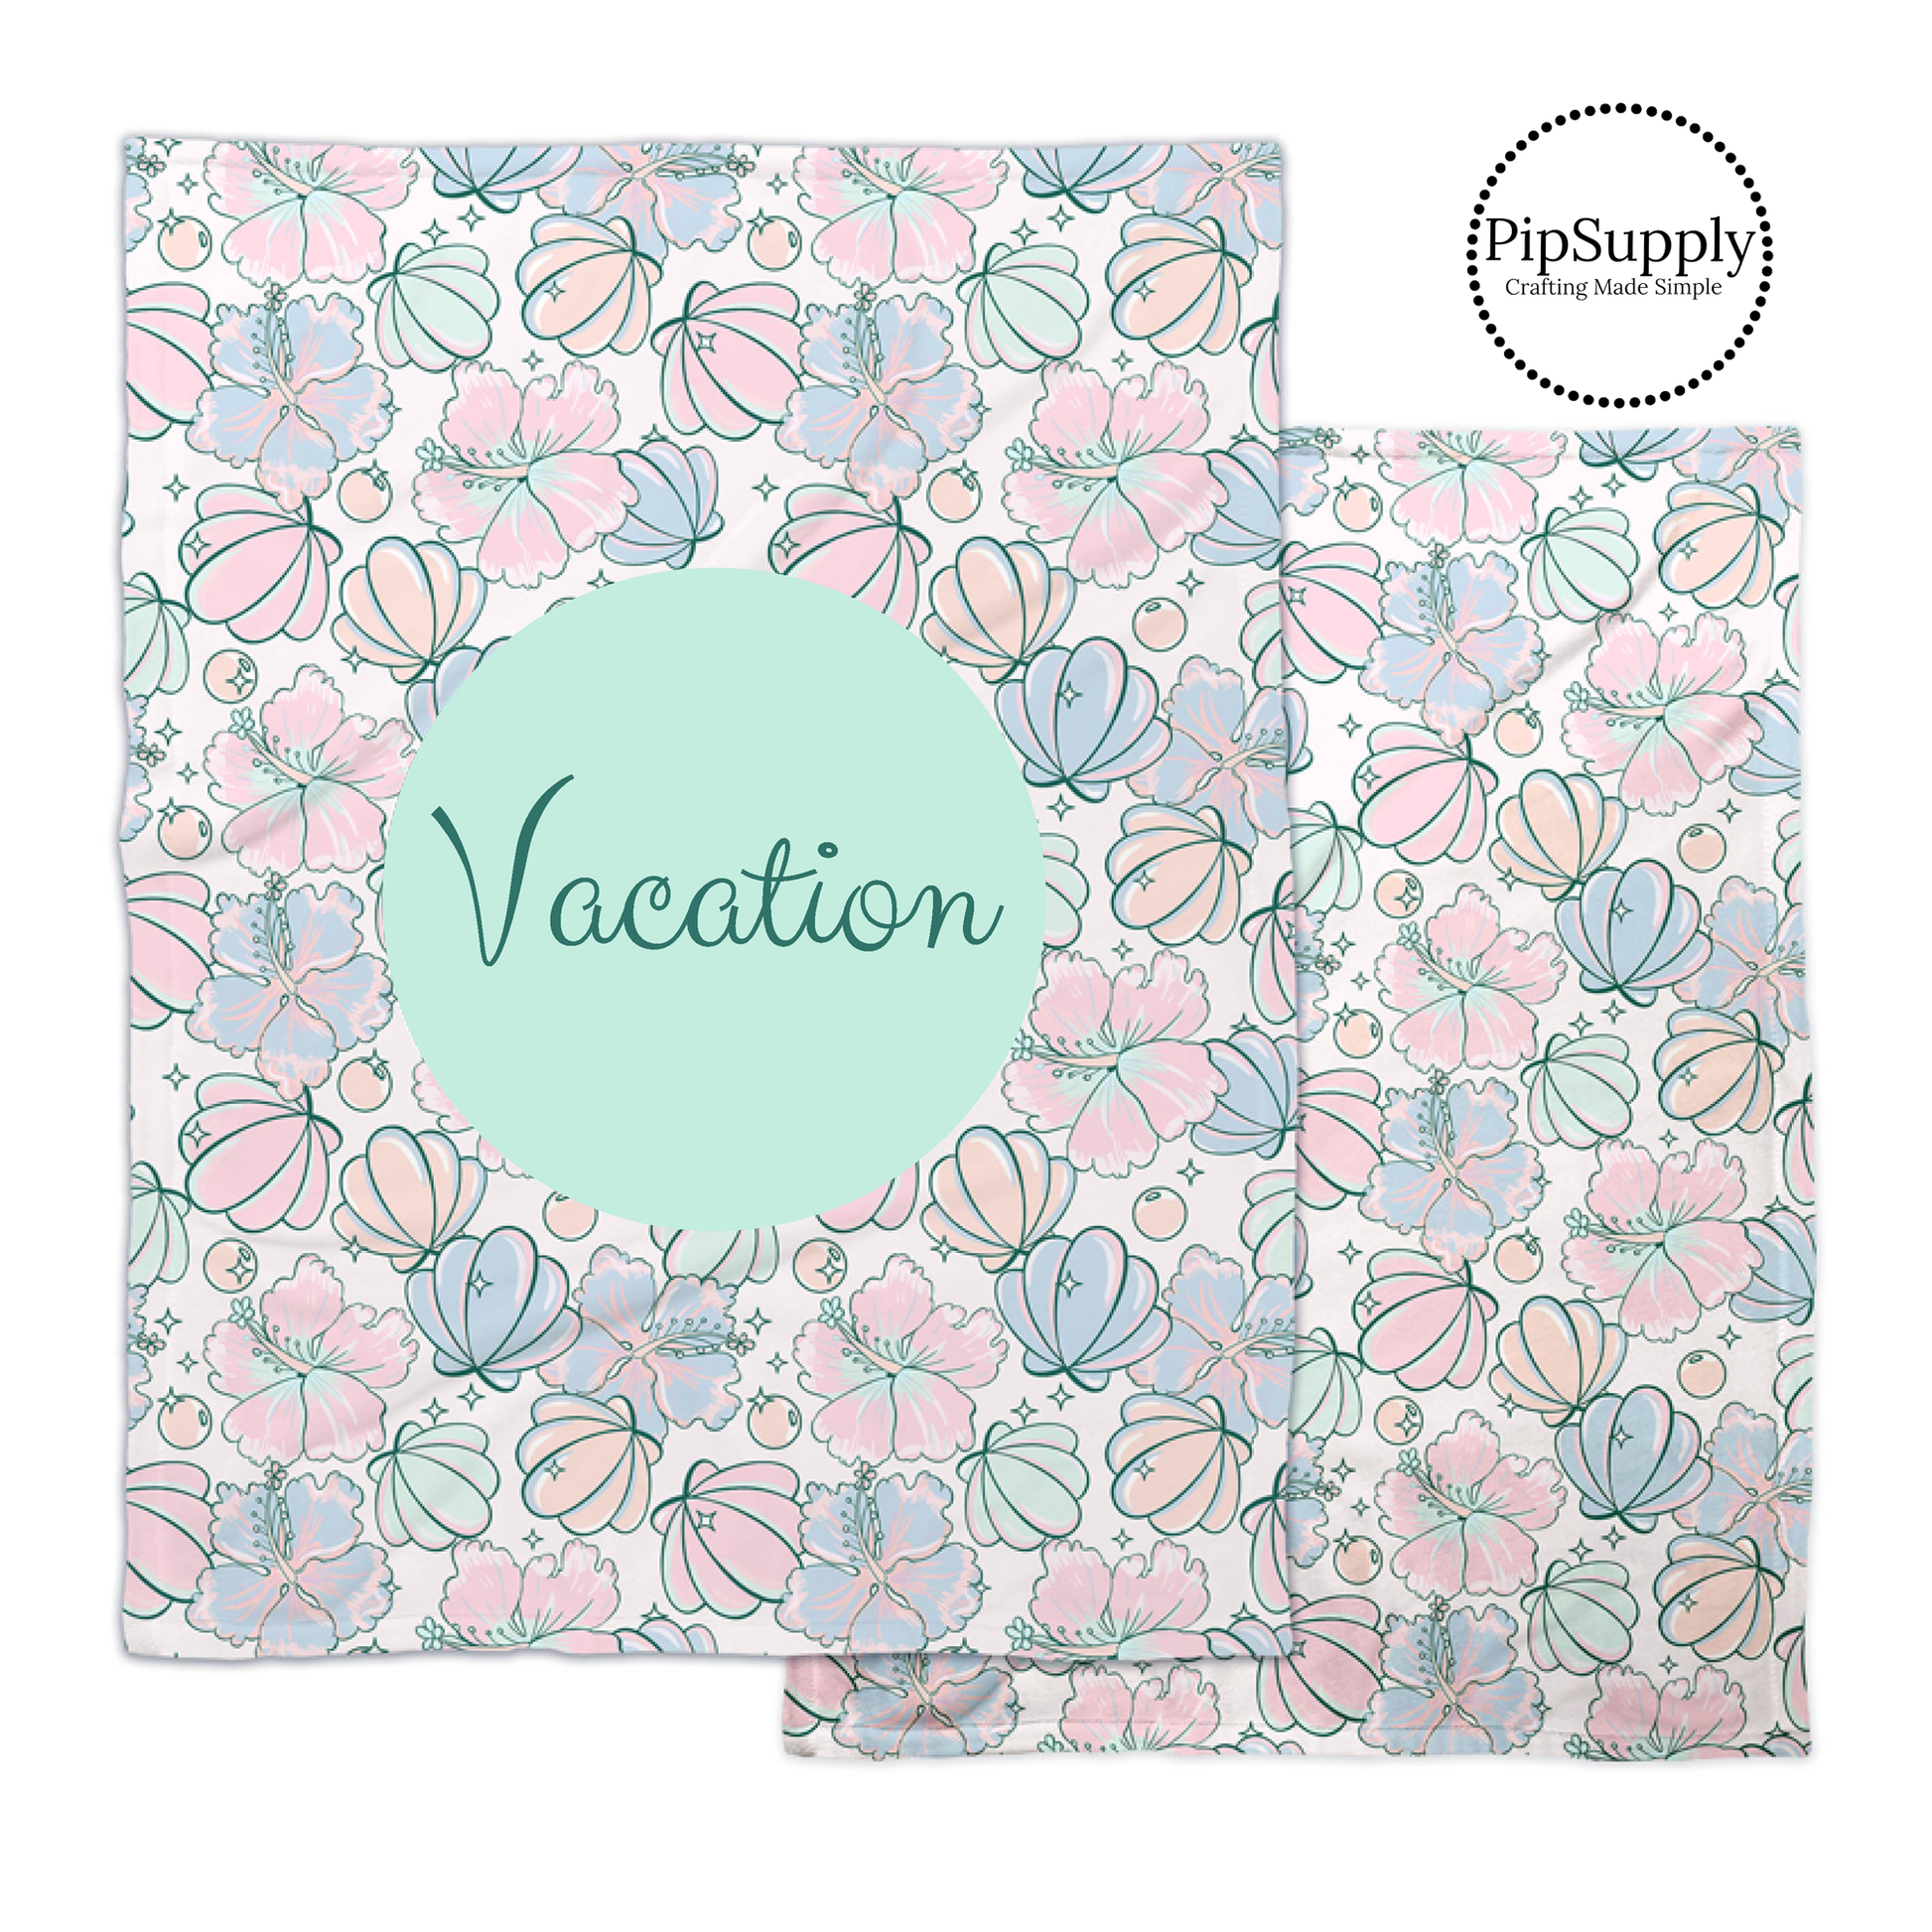 Summer pastel tropical floral patterned blanket with emerald text on green center.